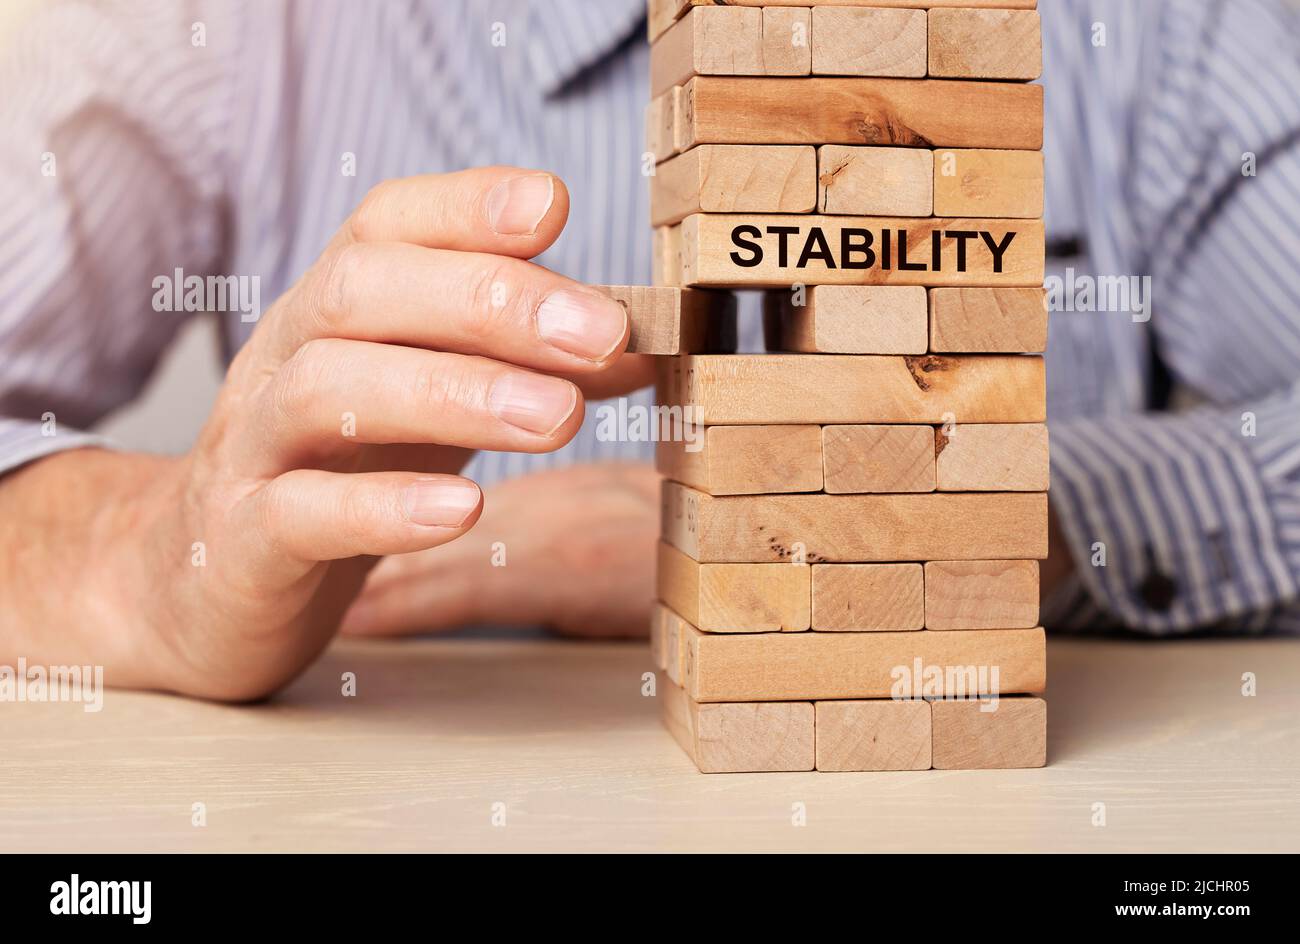 Concept of ruining balance and stability in business and economy. Unstable and instability. High quality photo Stock Photo